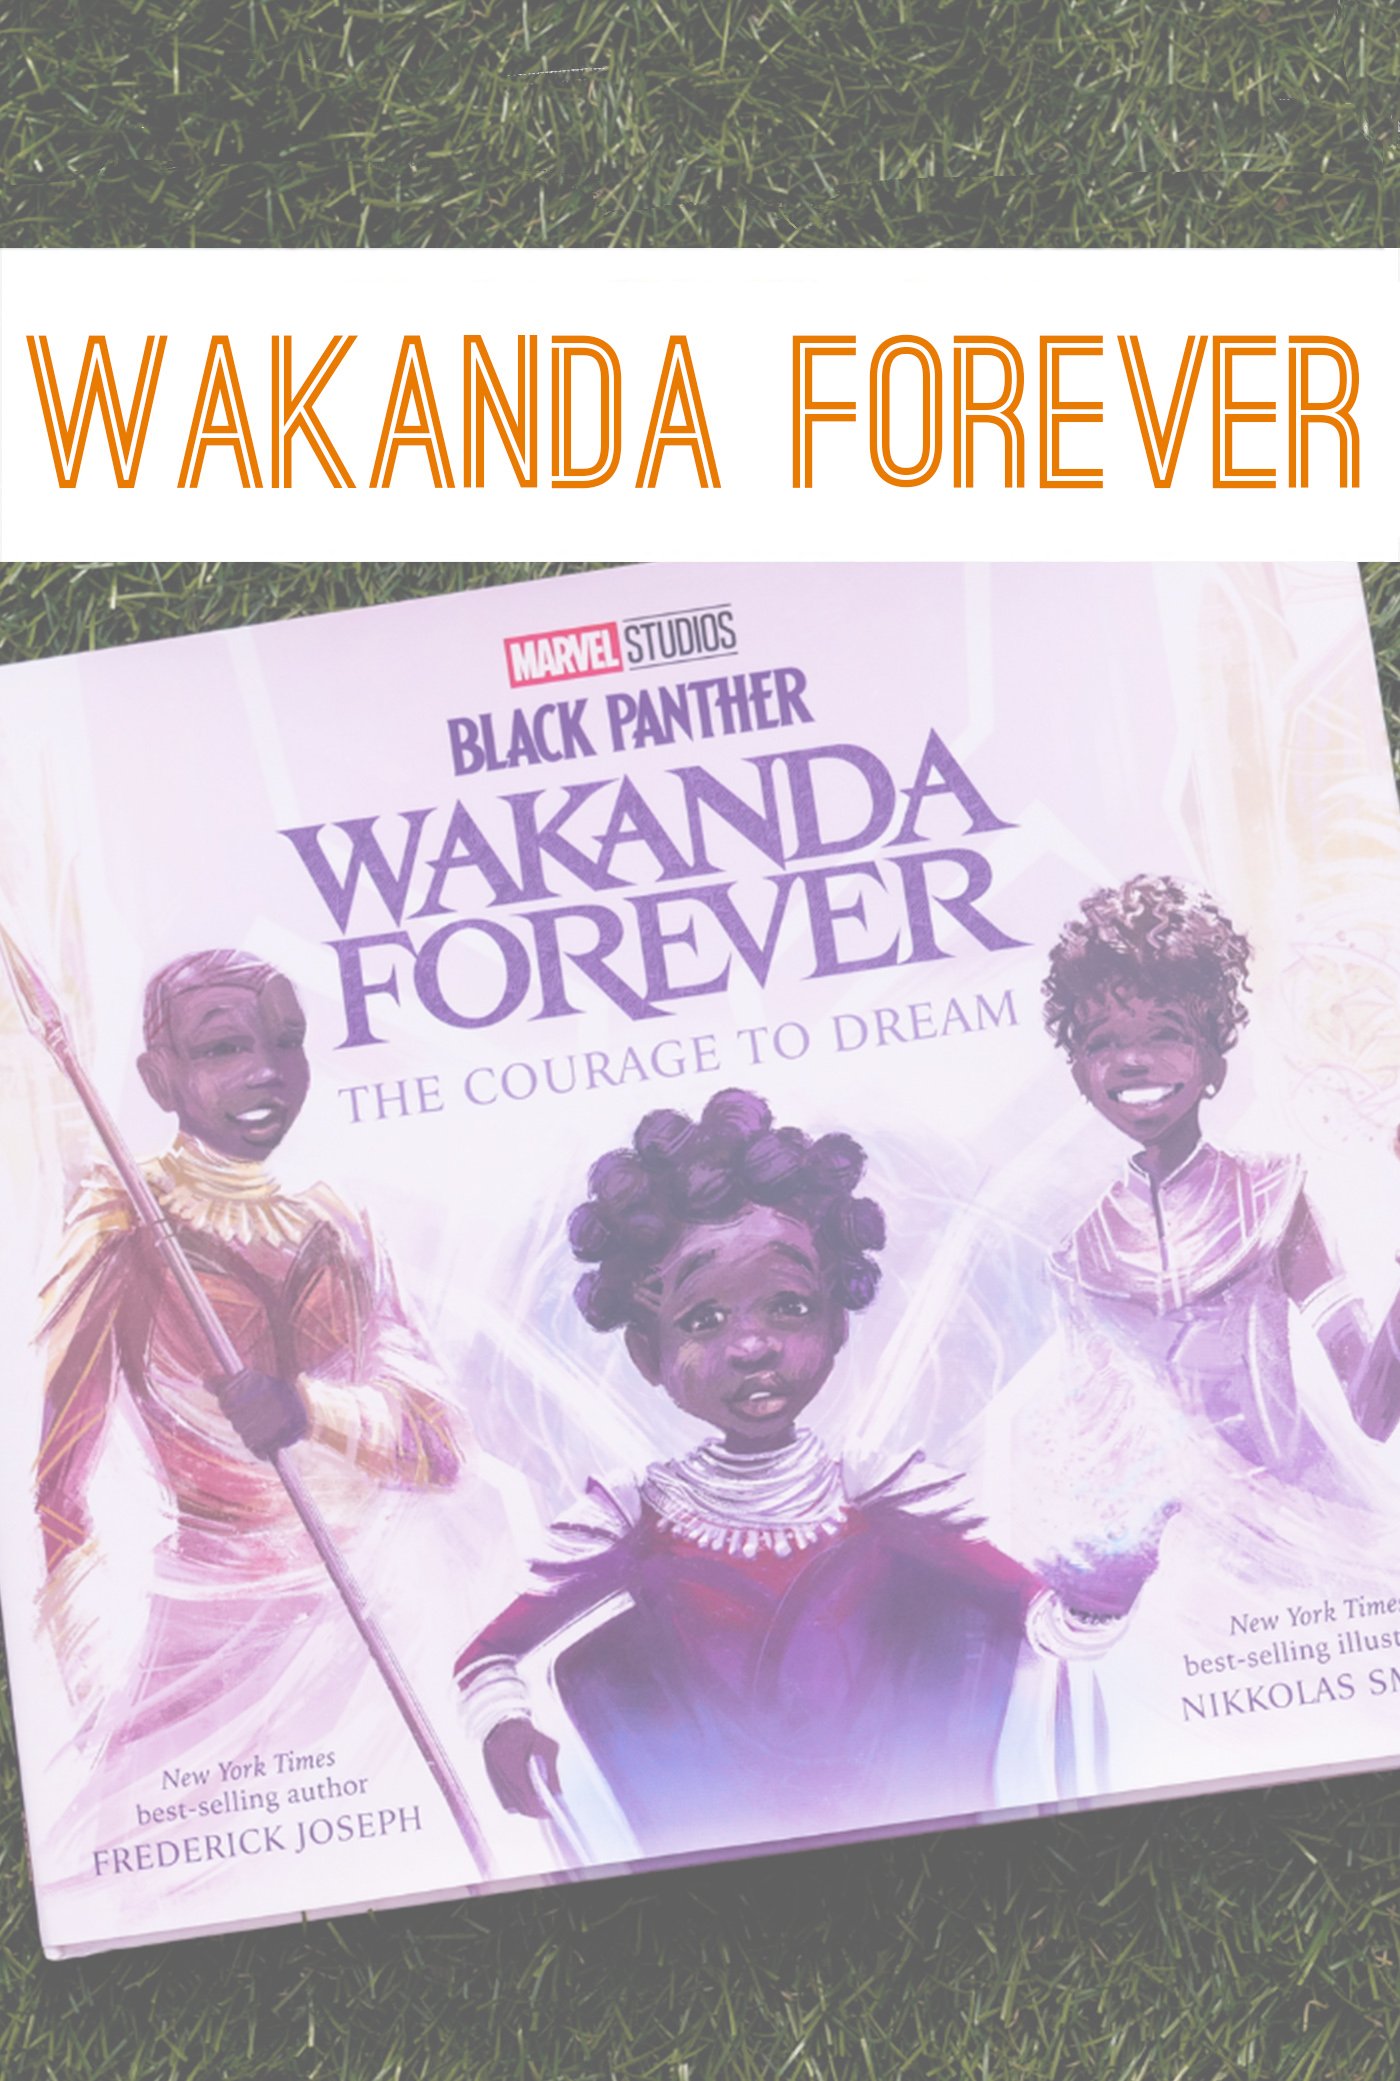 BLACK PANTHER WAKANDA FOREVER: THE COURAGE TO DREAM